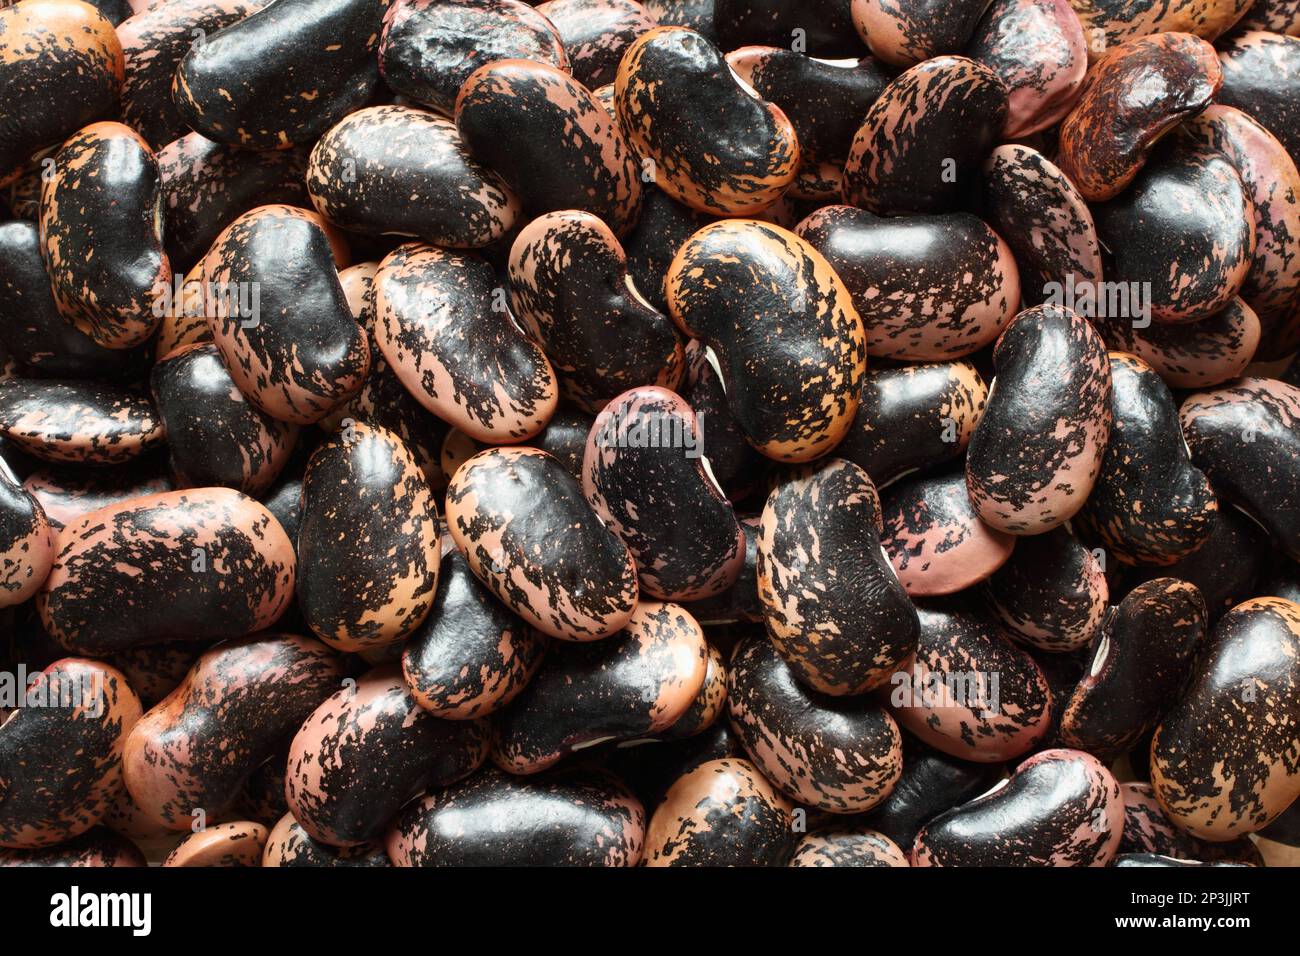 View from above on a pile of raw pink, beige with brown speckled kidney beans. Closeup Stock Photo